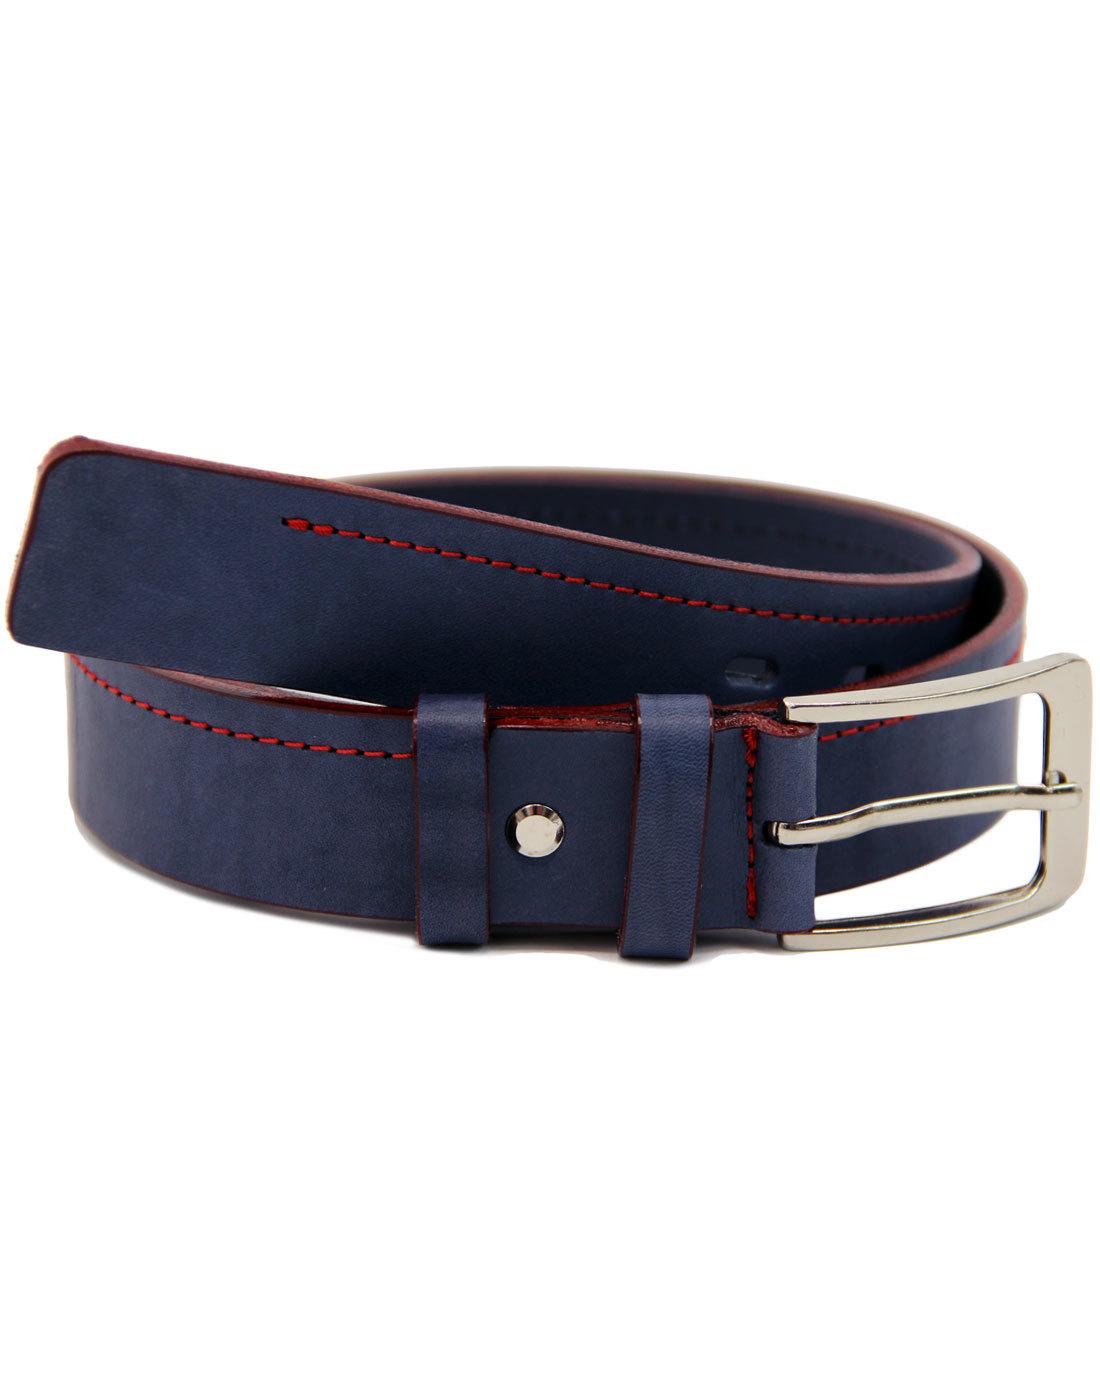 LACUZZO Men's Retro 1960s Mod Red Stitch Leather Belt in Navy